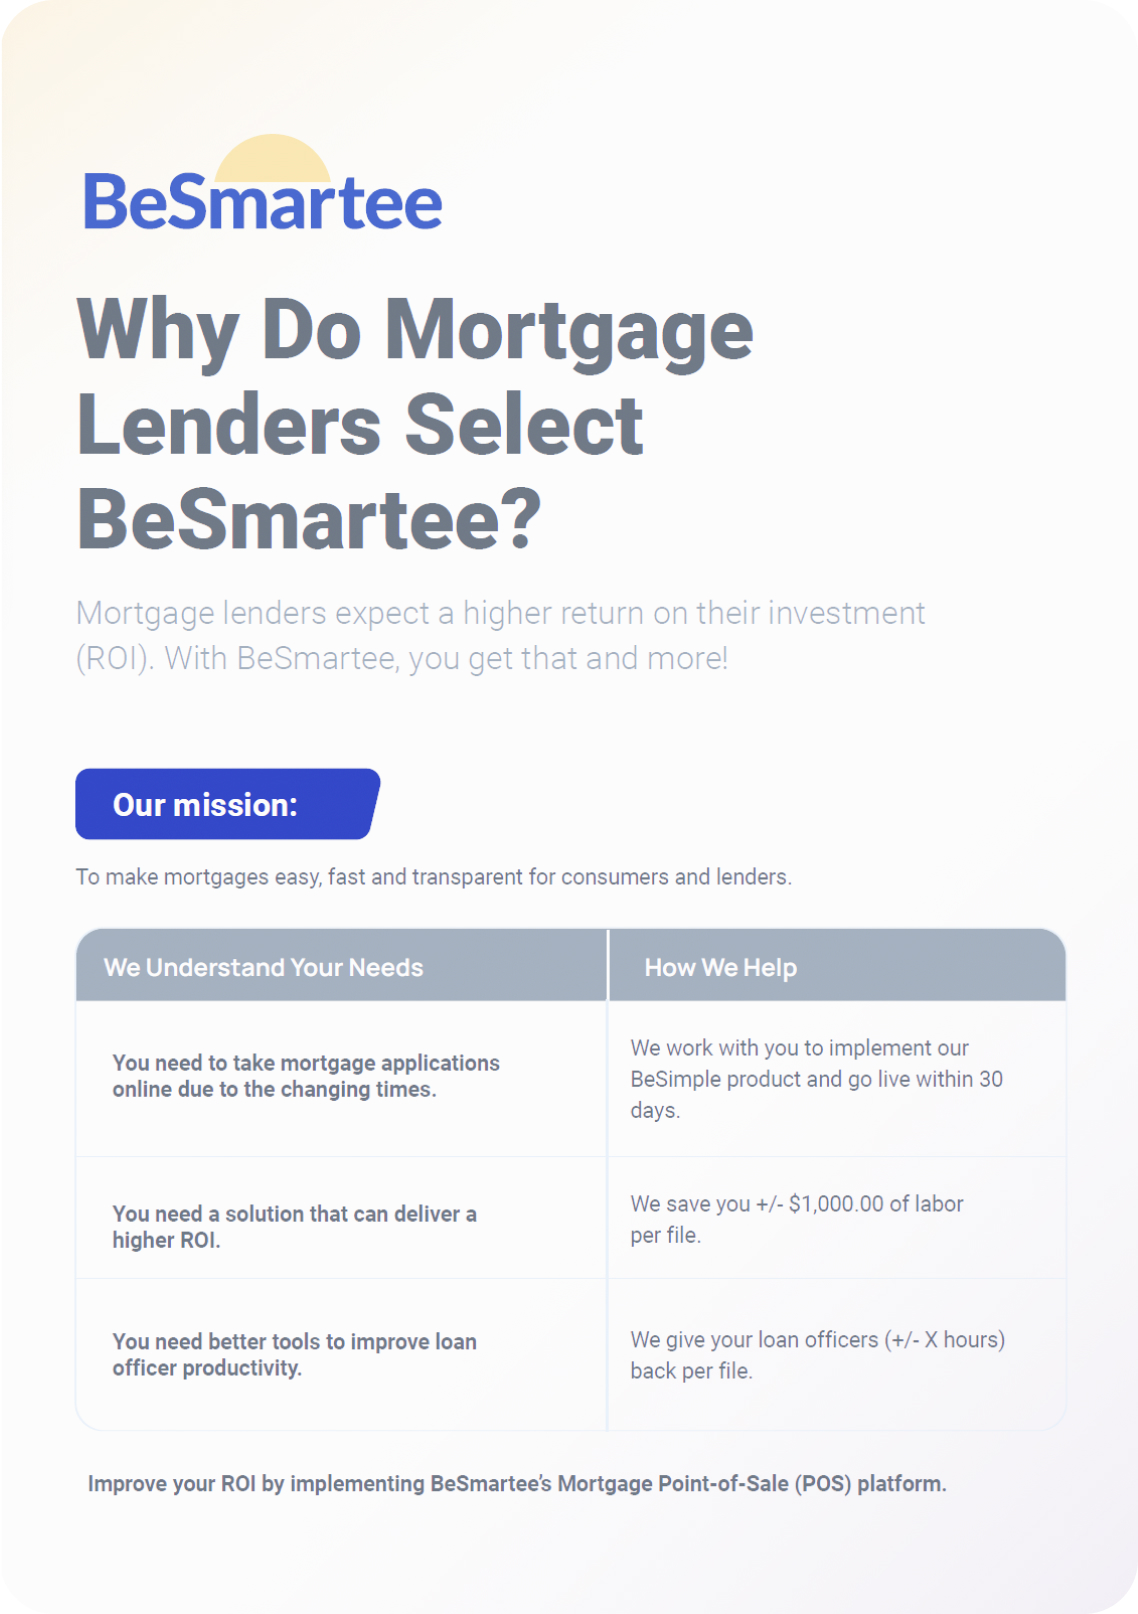 Why Do Mortgage Lenders Select BeSmartee?